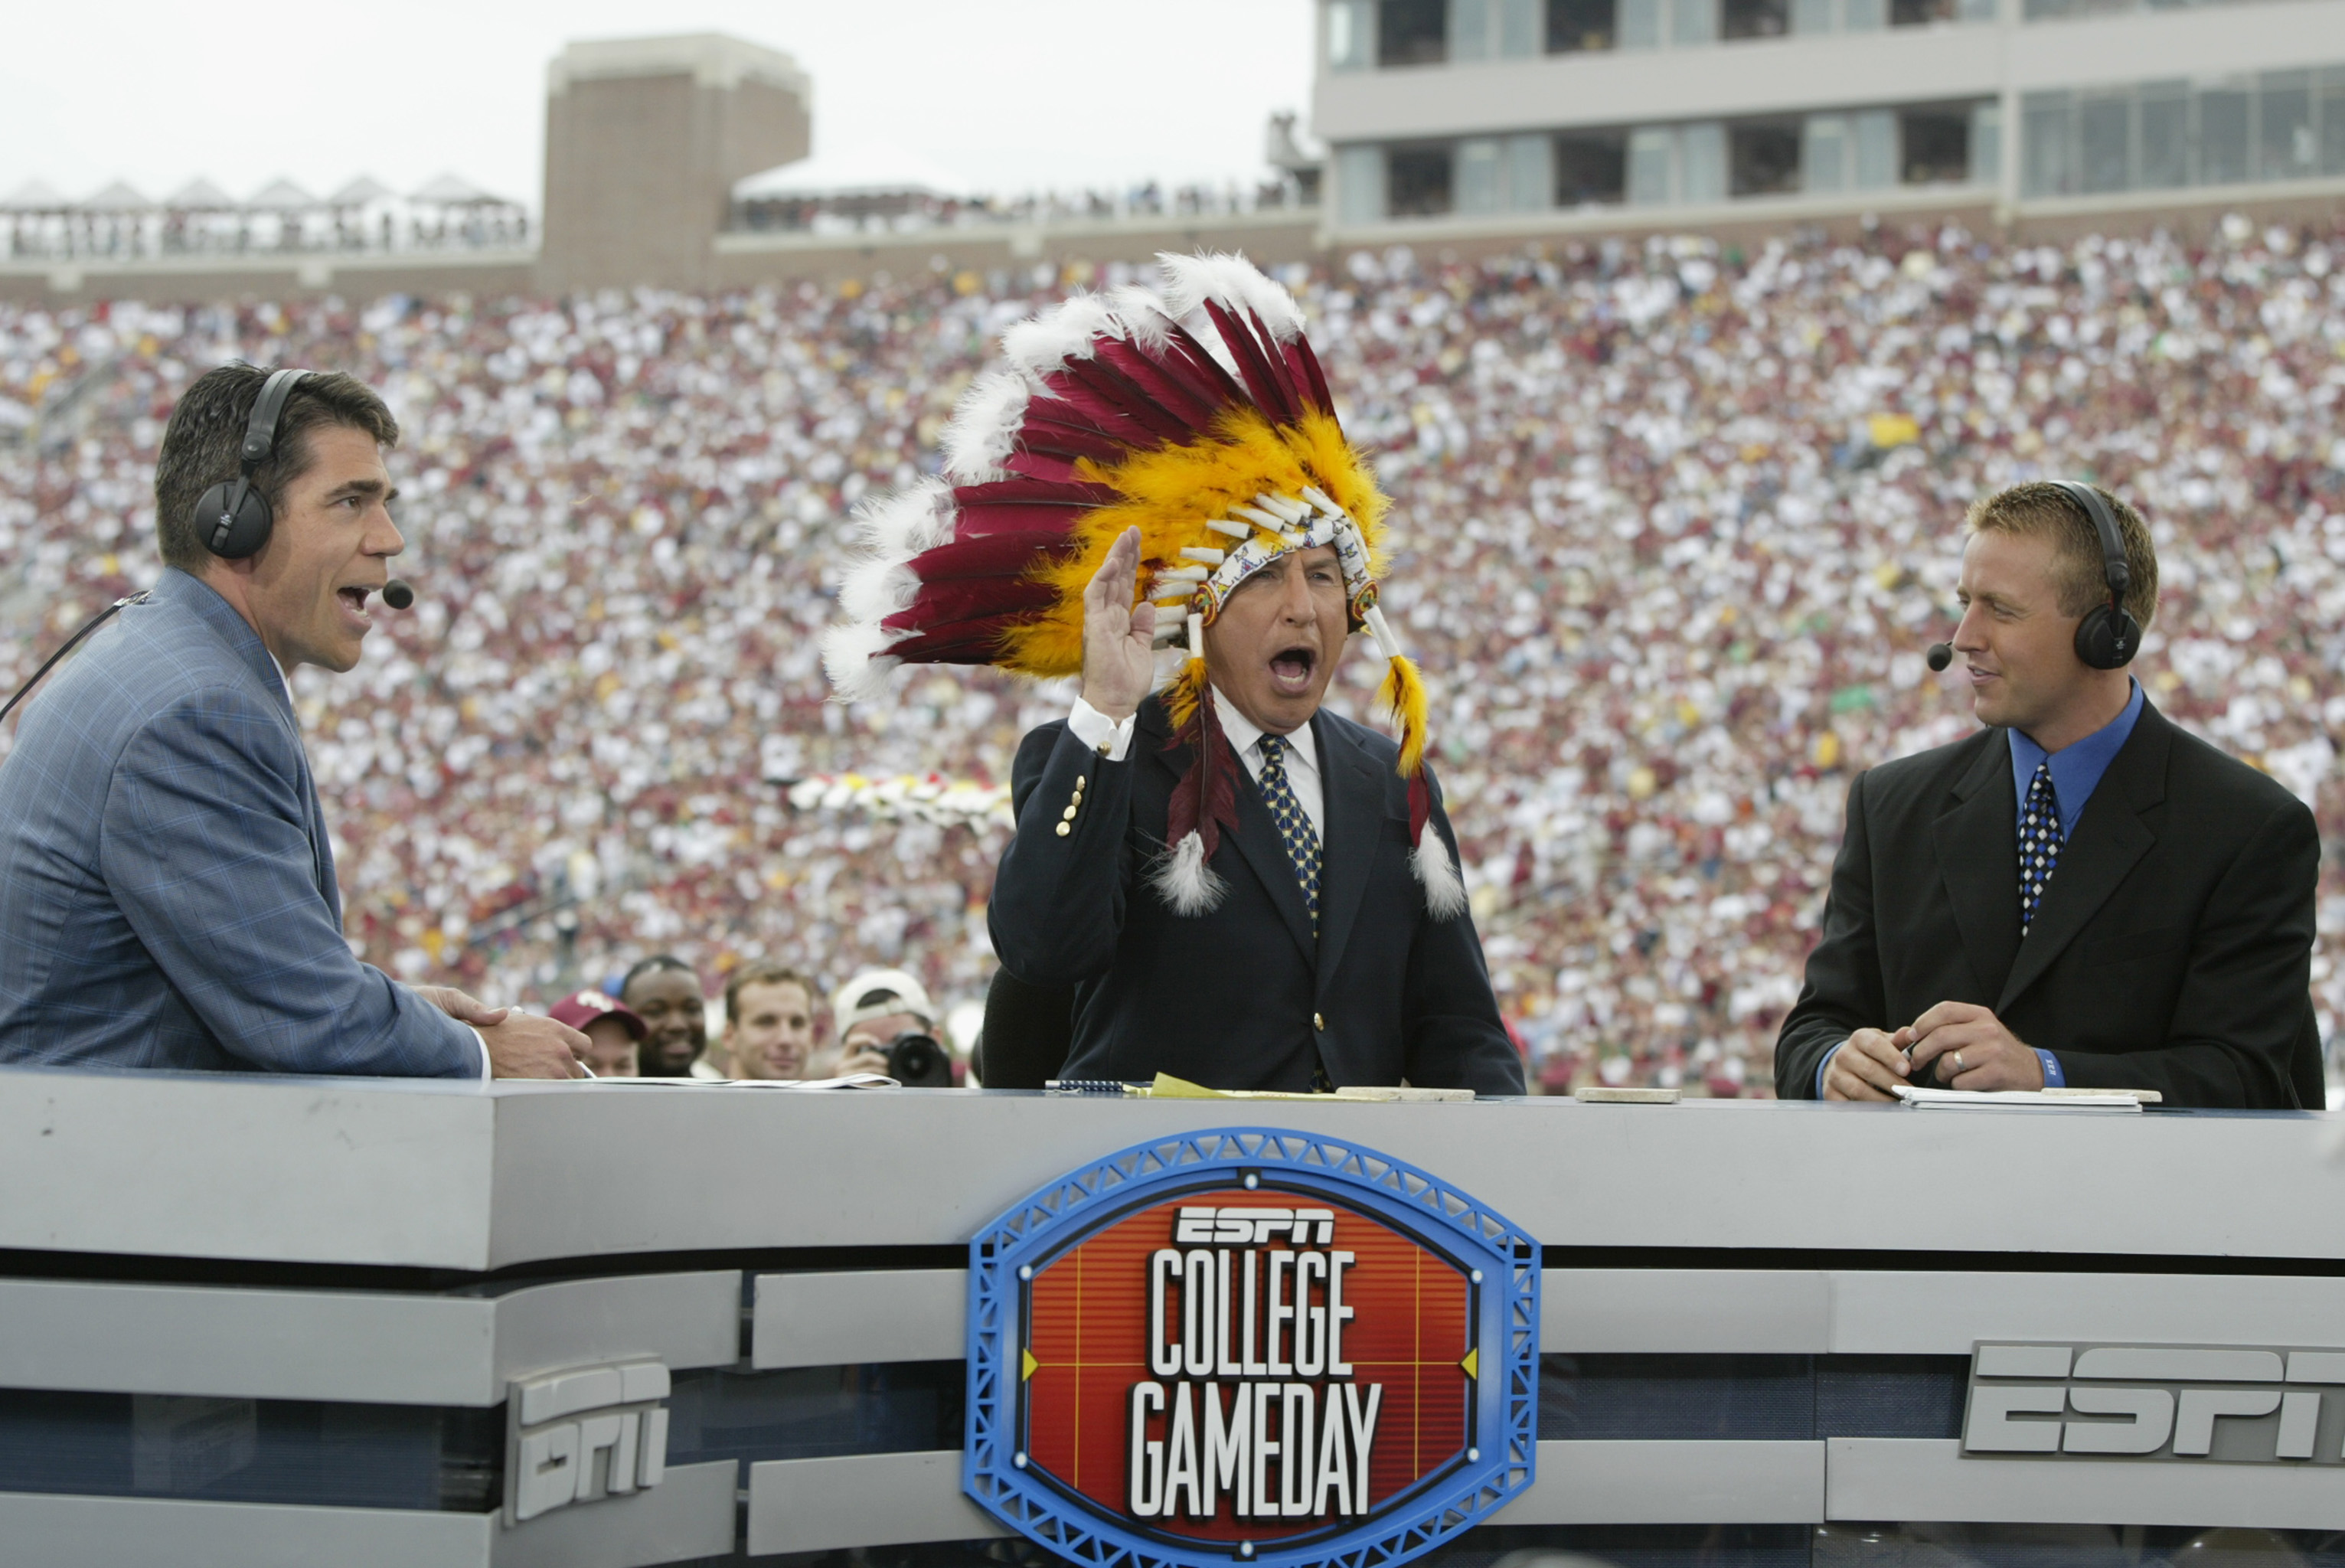 How to Watch College Gameday Live Stream Online